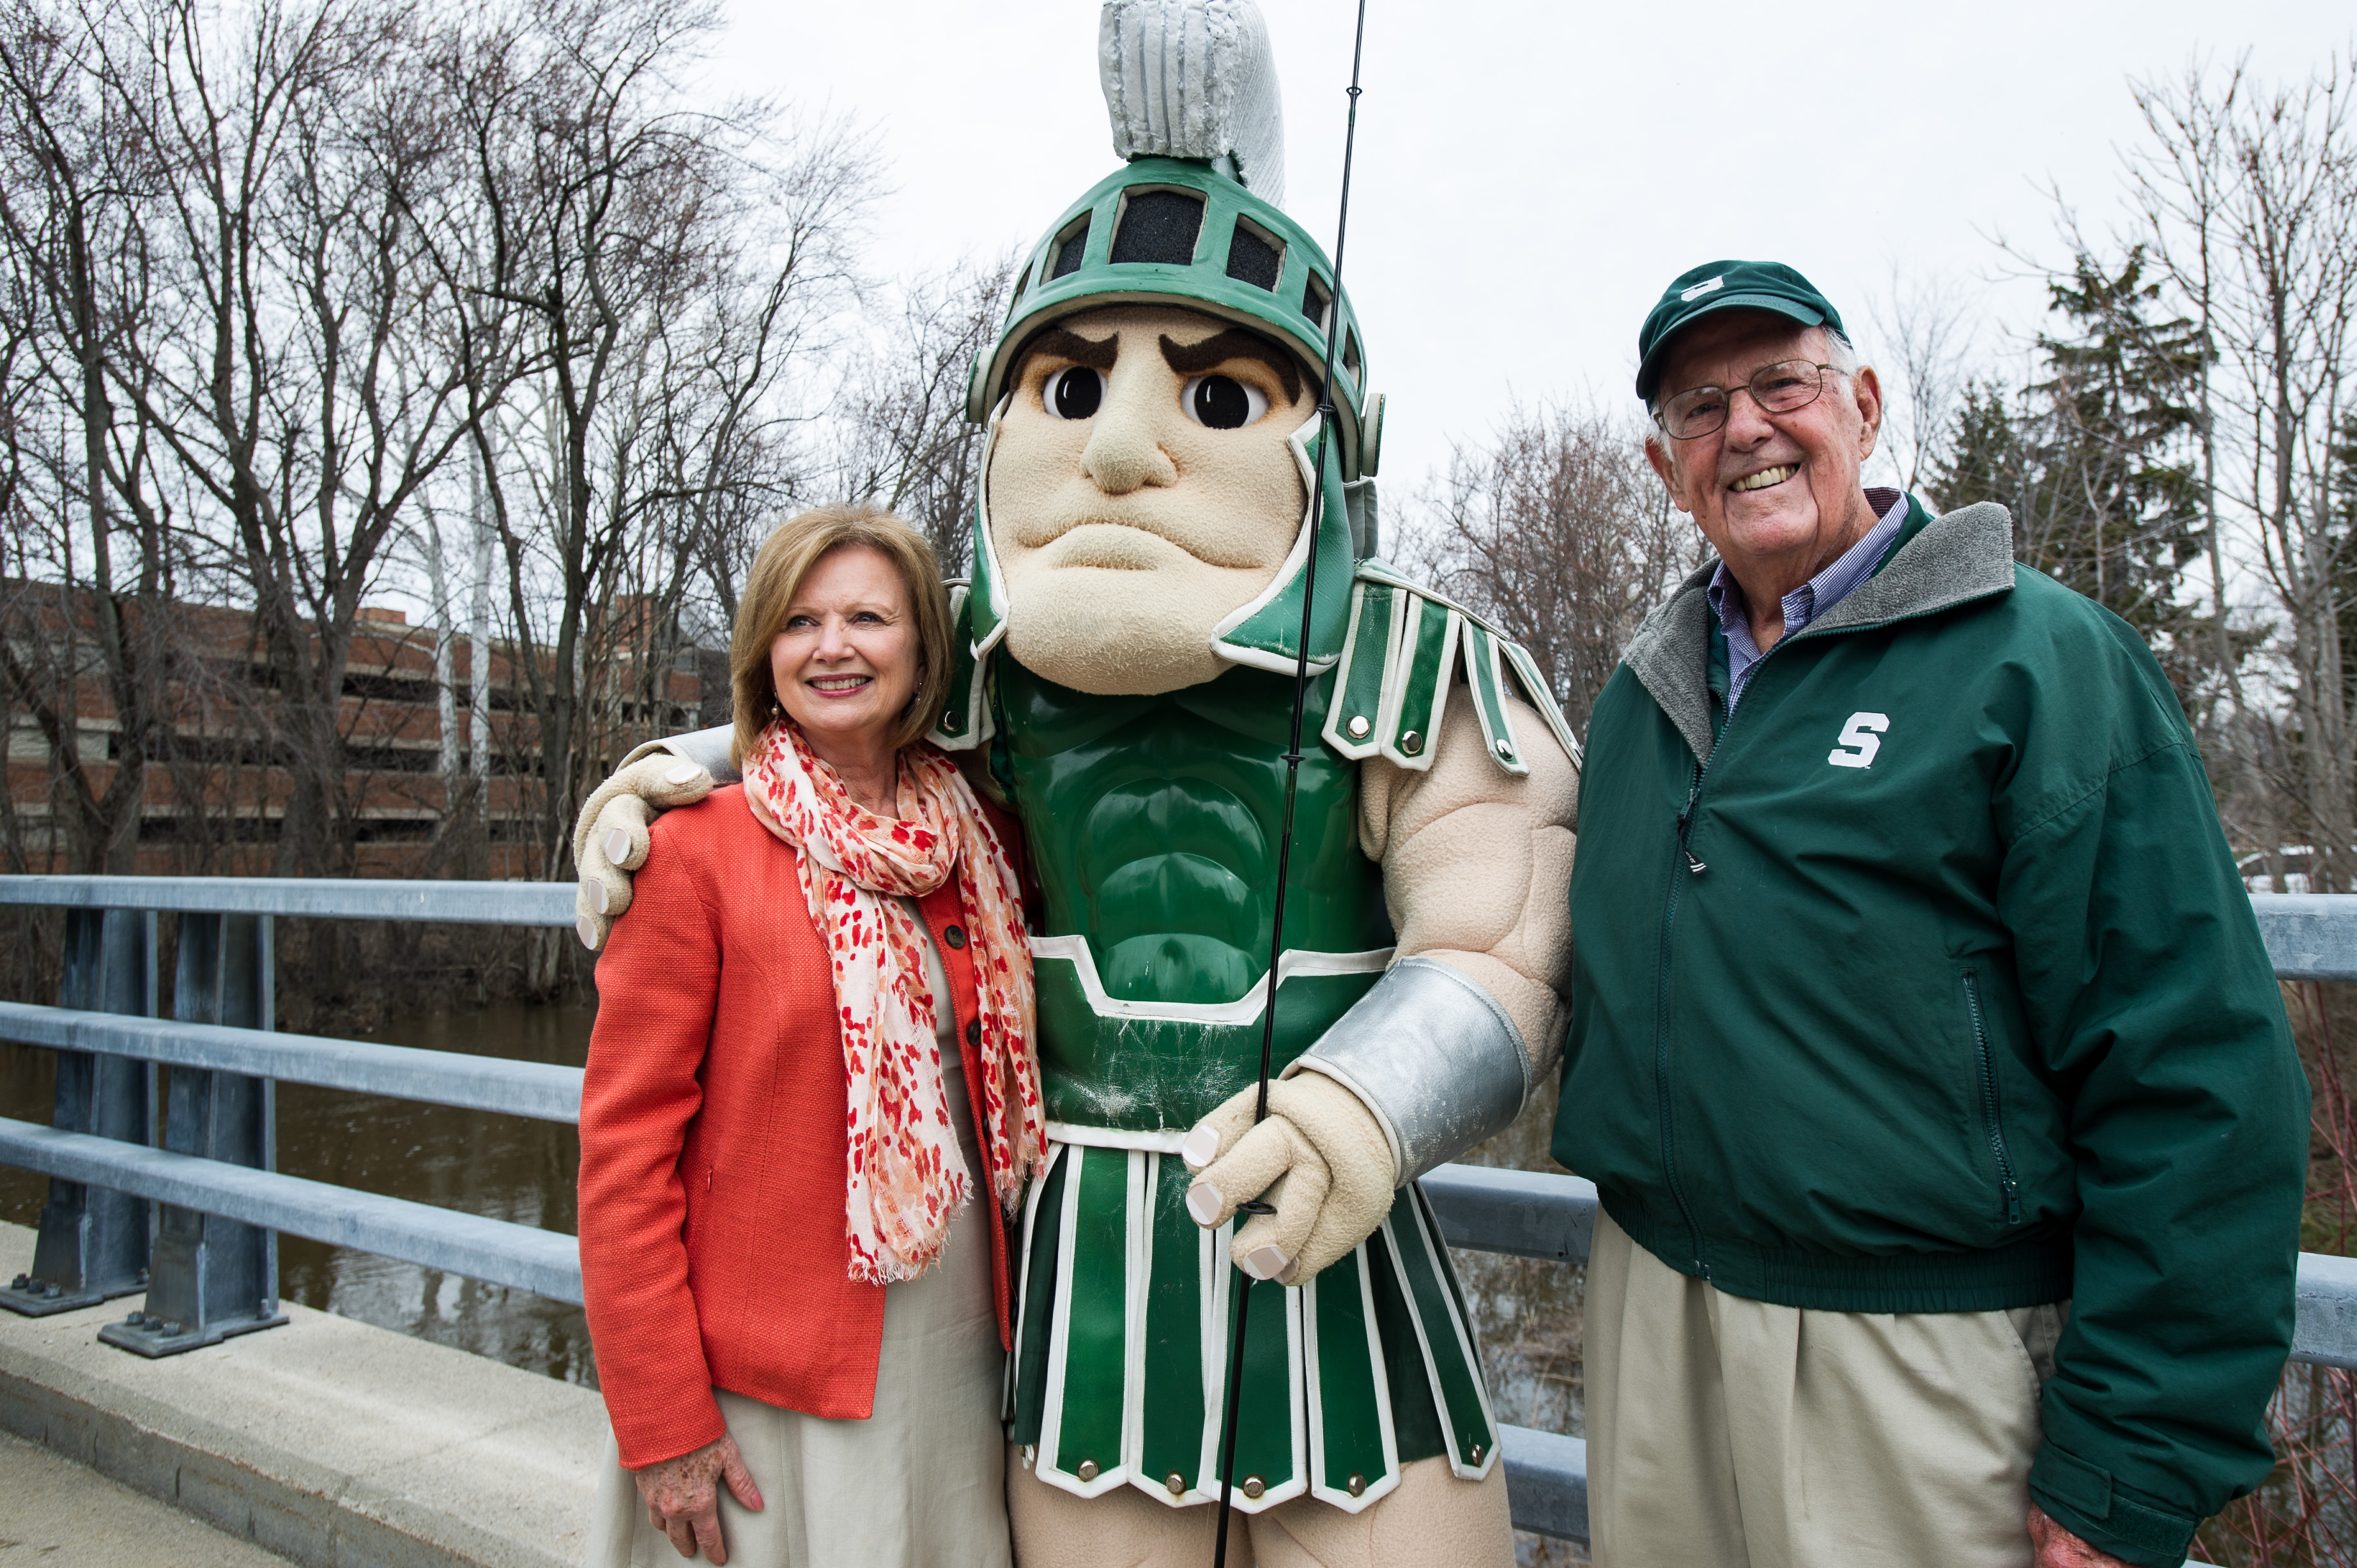 Guyer, along with MSU Provost June Youatt and Sparty, took part in an April 15, 2013, ceremony in which 3,000 steelhead were re-introduced to the Red Cedar River.